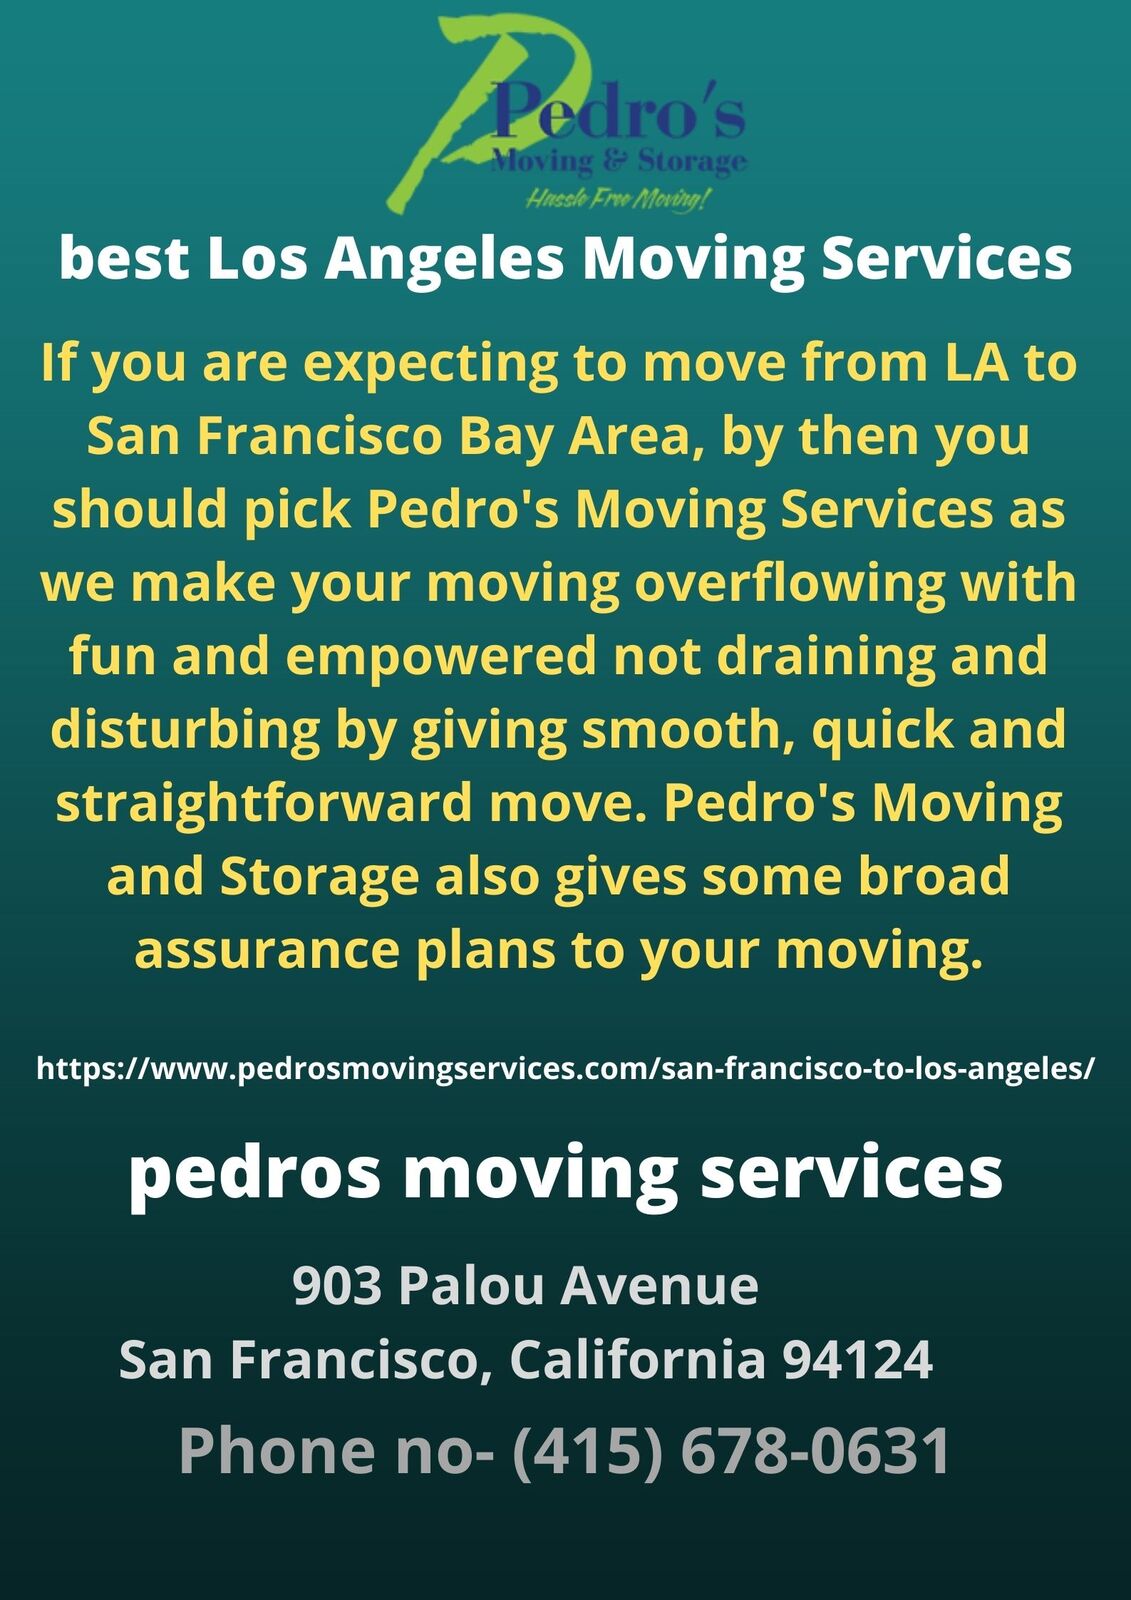 Los Angeles Moving Services